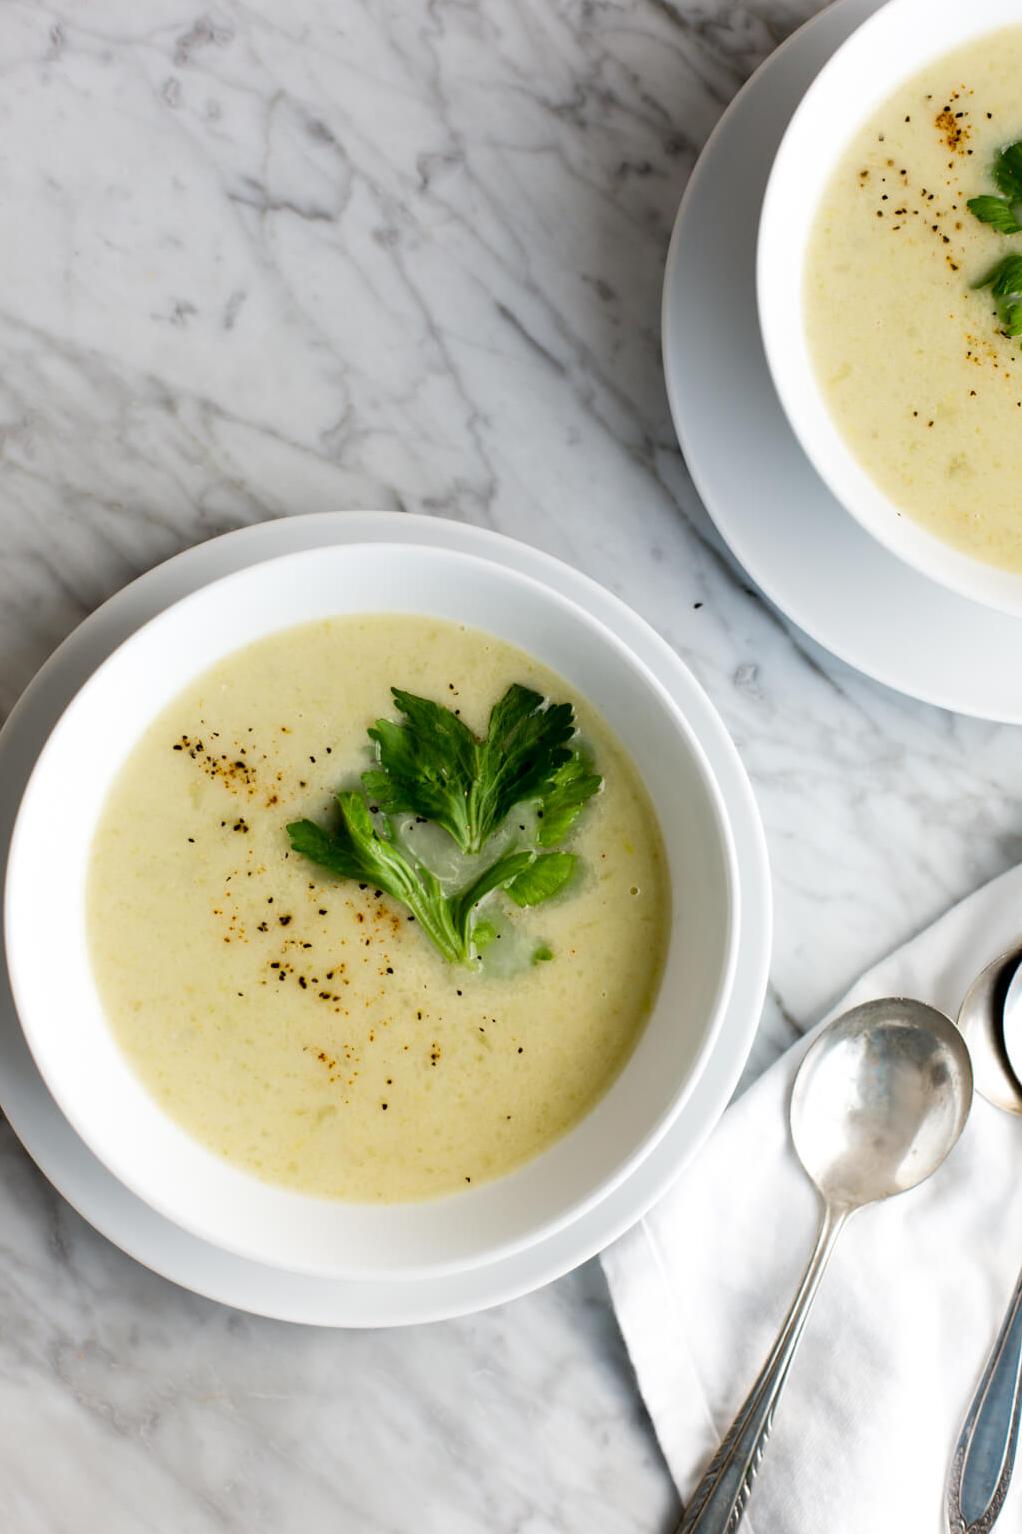 Mouth-watering gluten-free kumara and celery soup